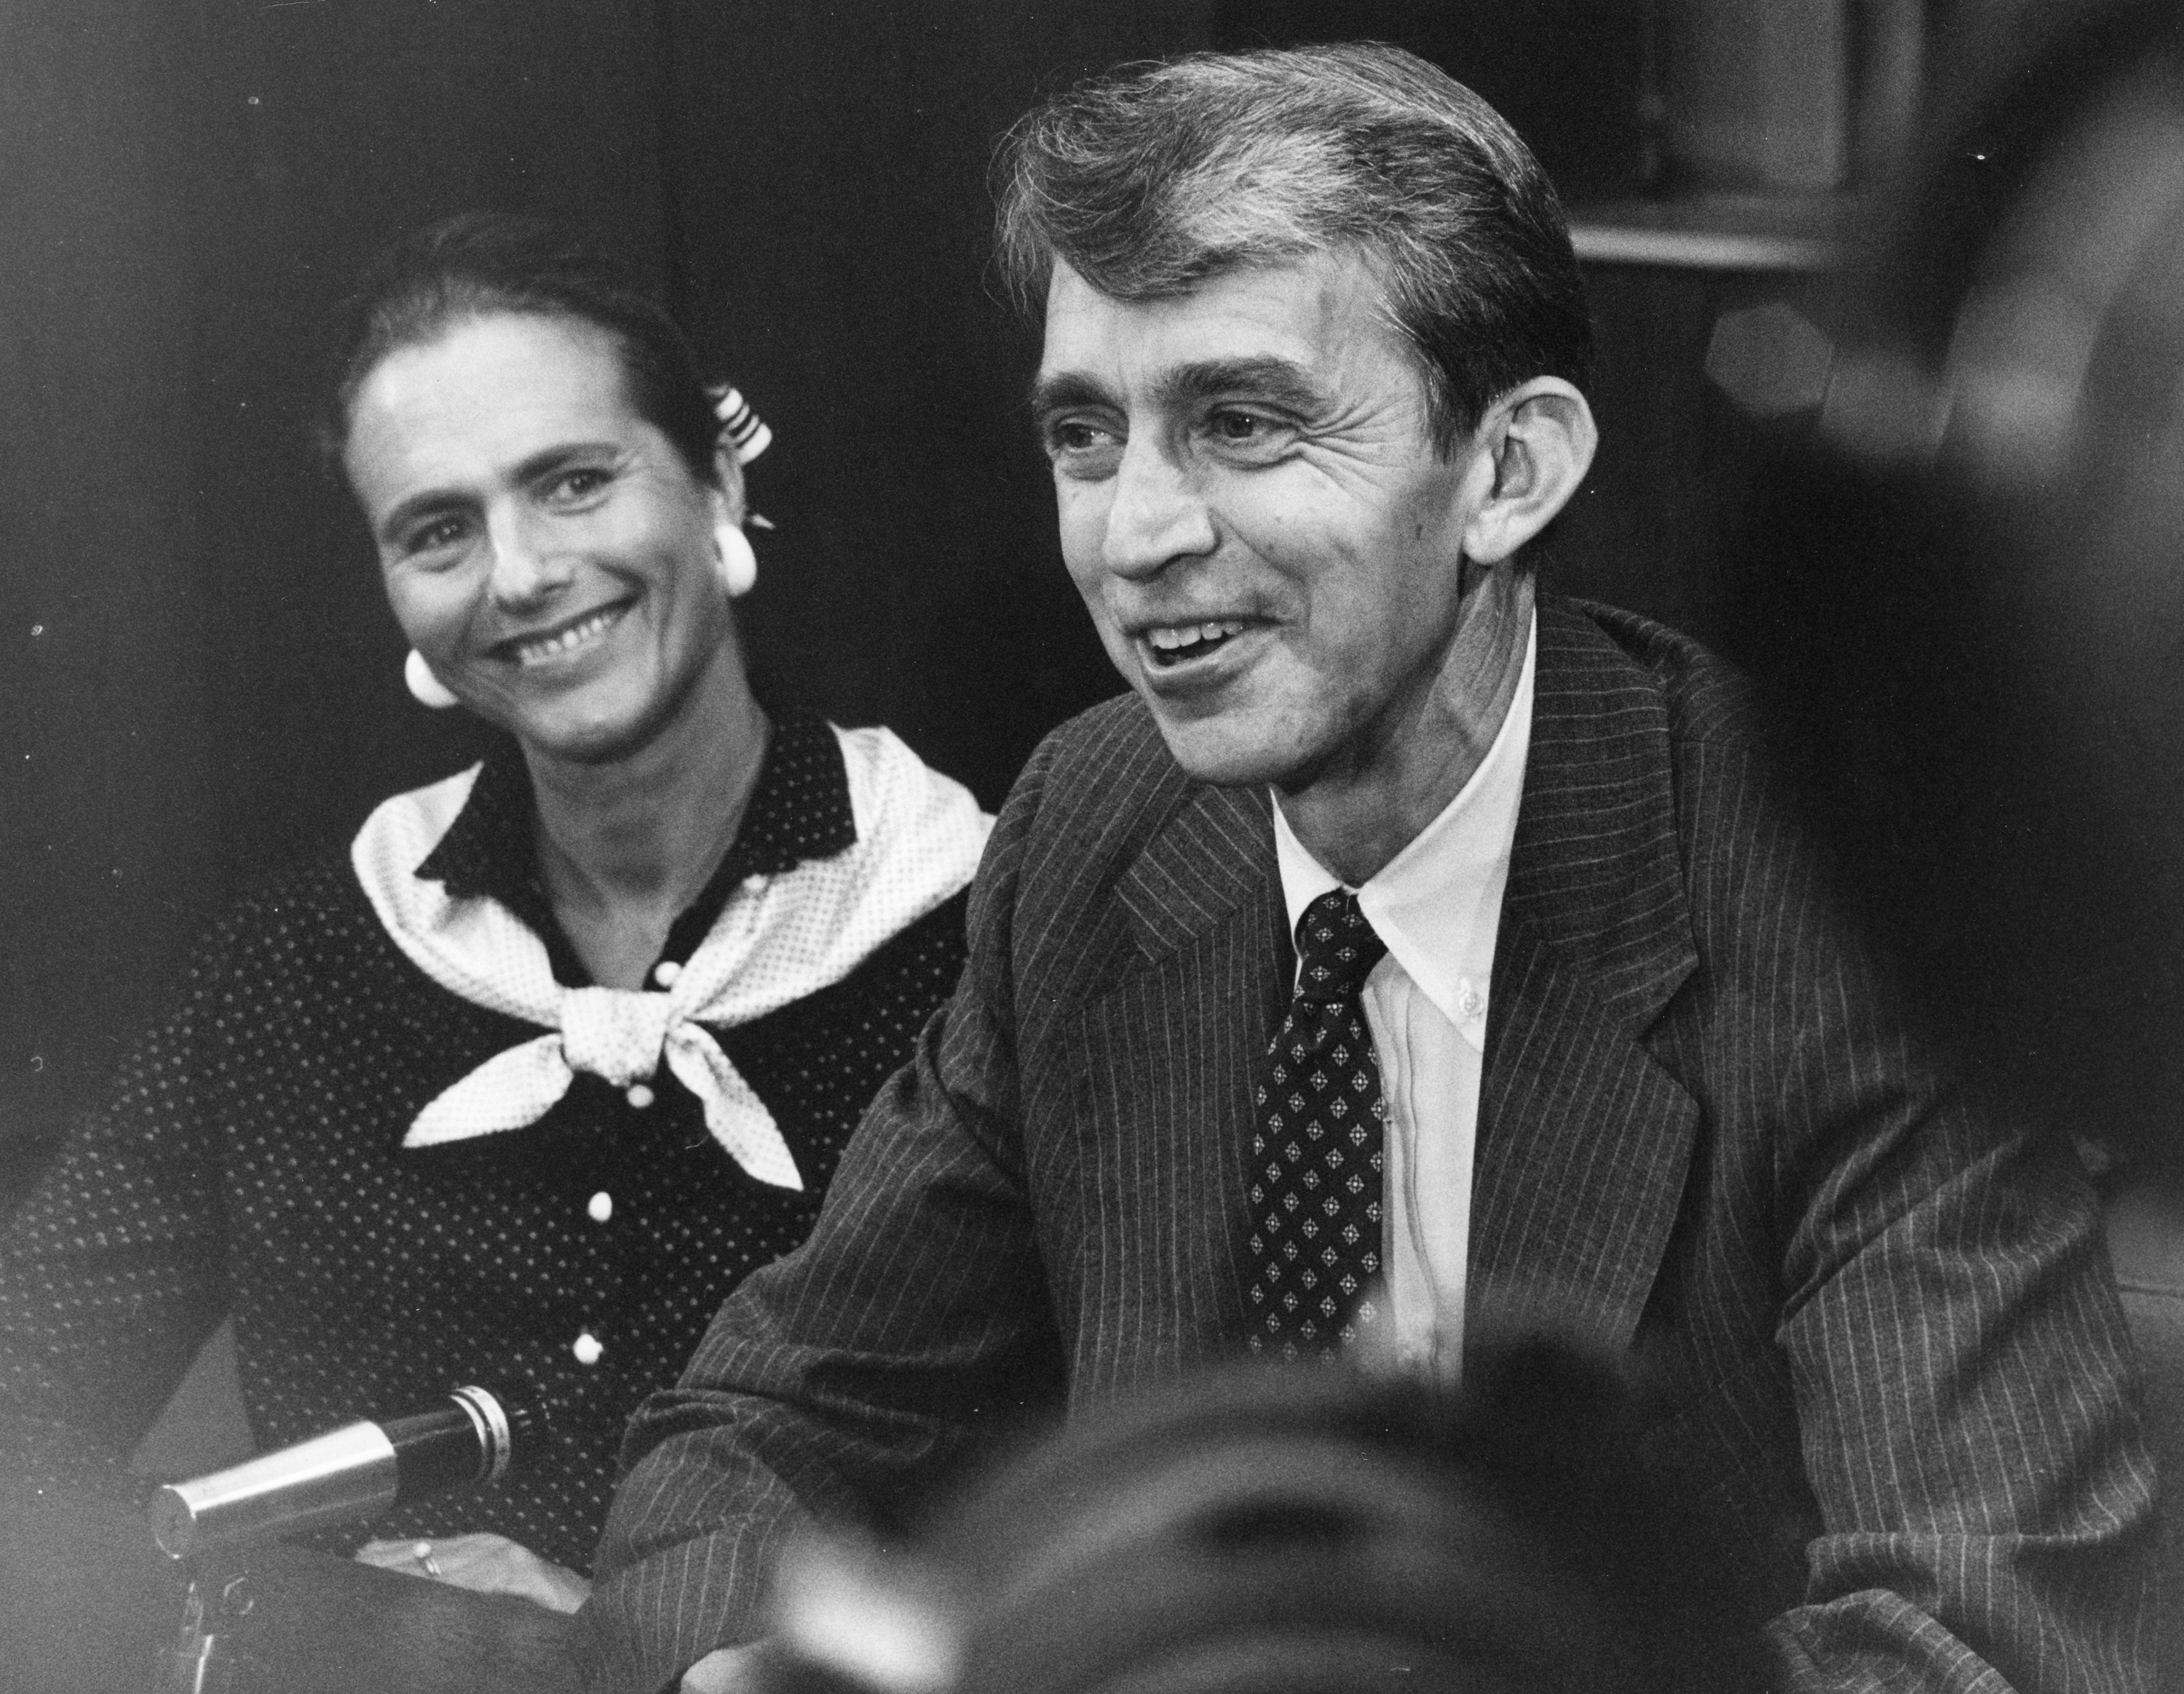 Cecil Mackey and his wife, Clare, attend a news conference in June 1979, just weeks before Mackey was inaugurated as the 16th president of Michigan State University.